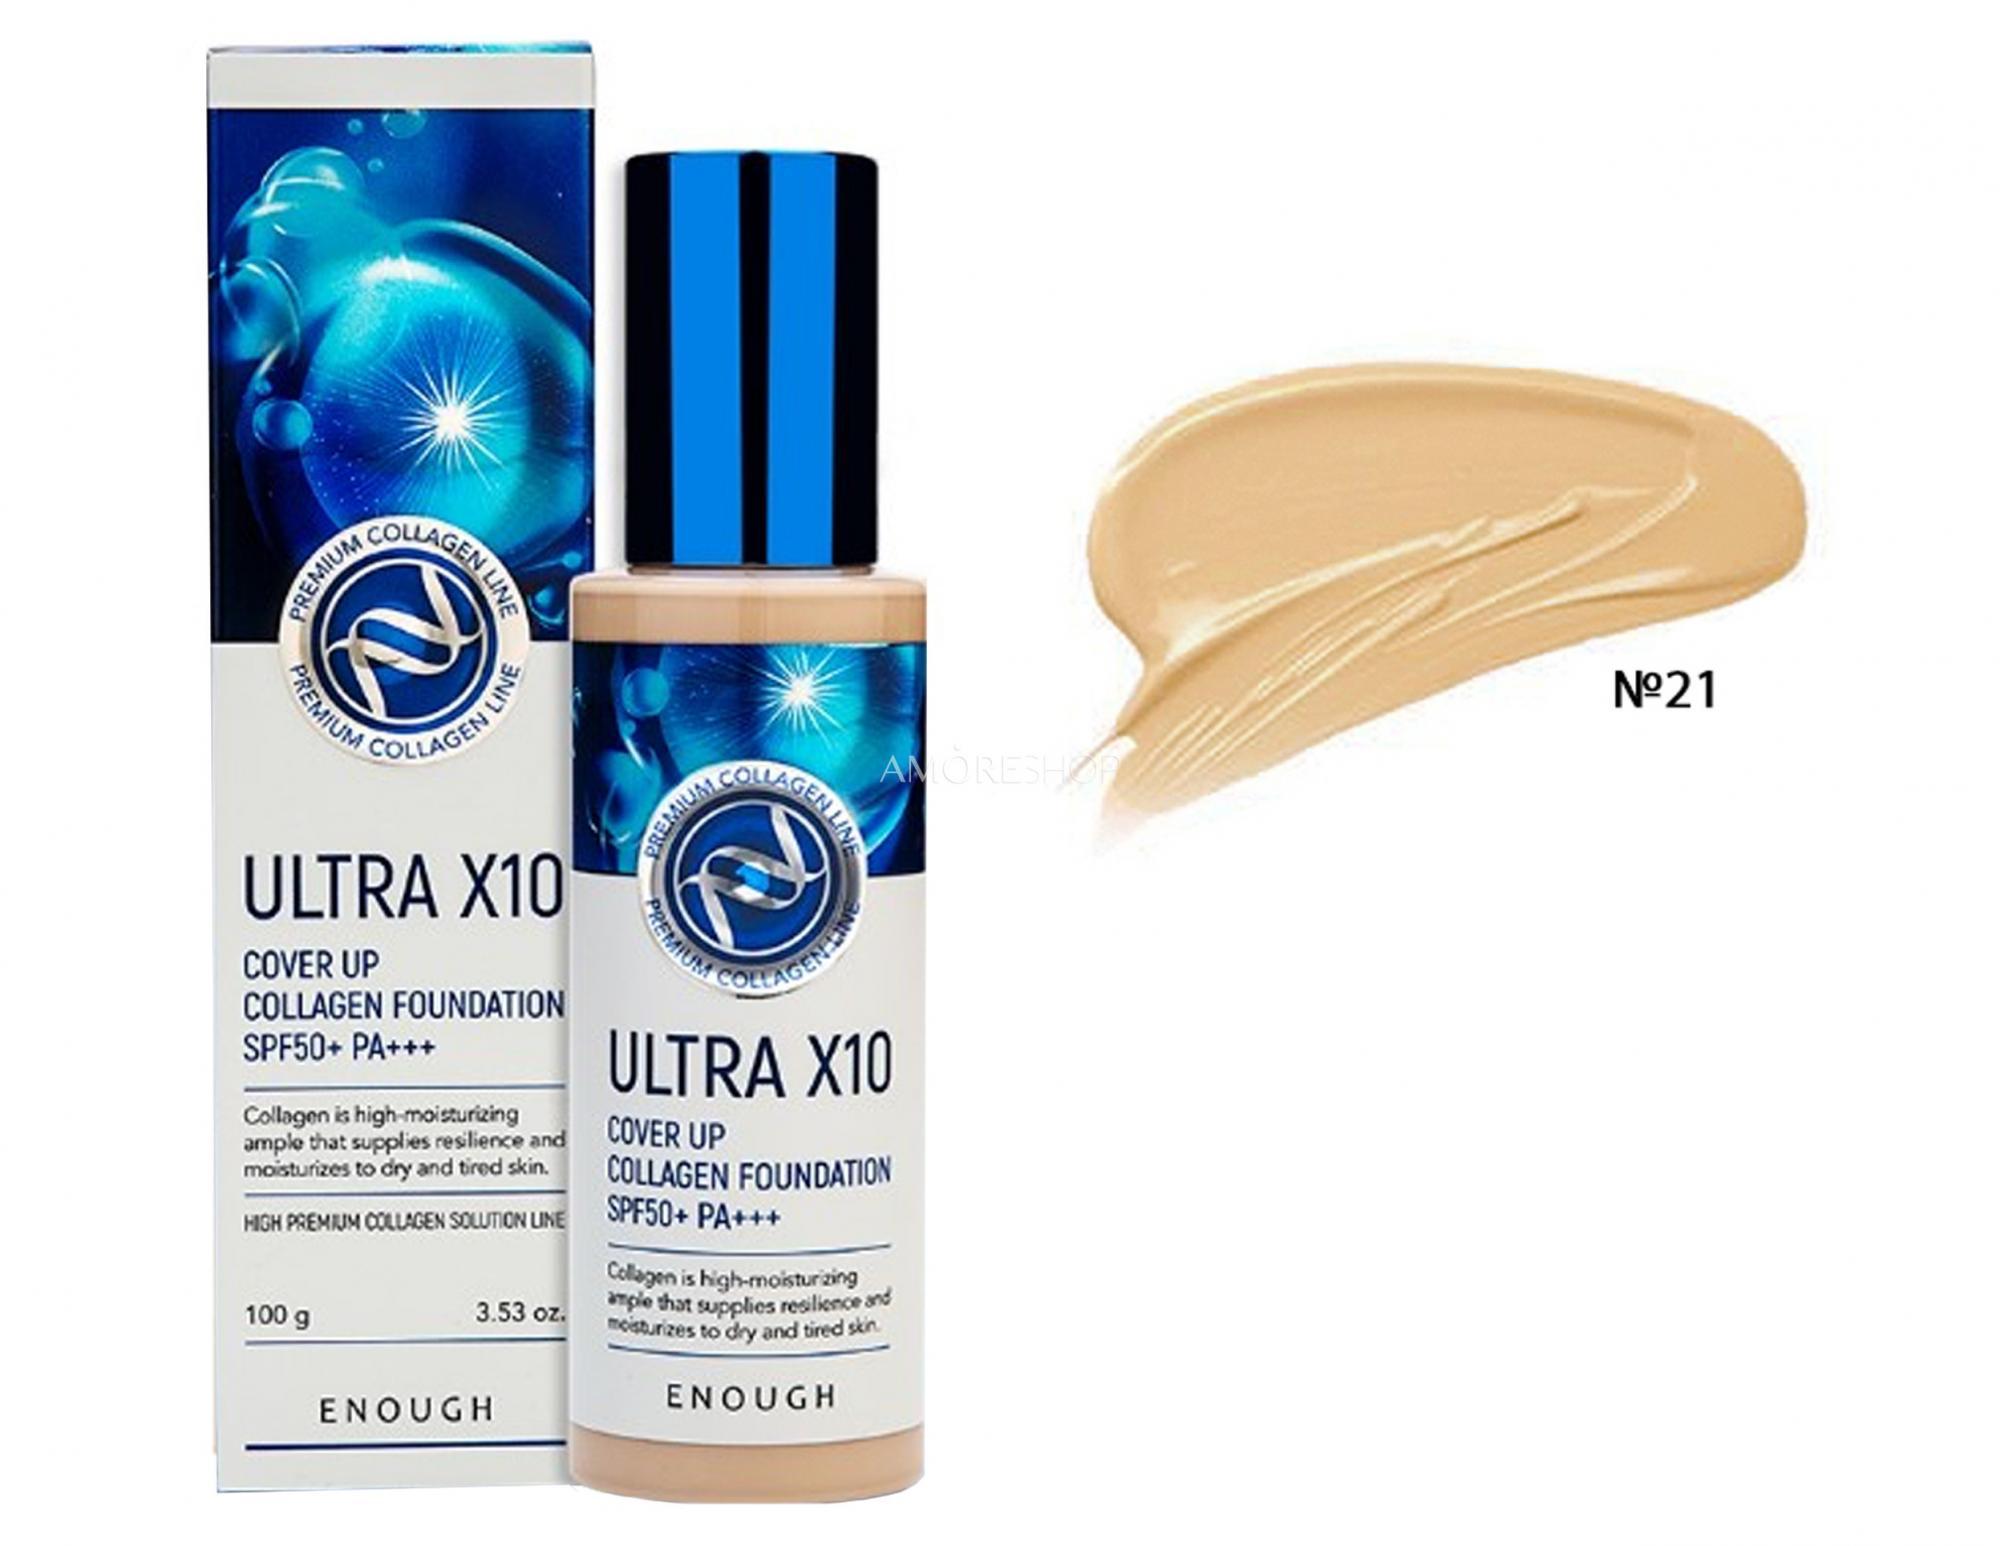 Enough Ultra X10 Cover Up Collagen Foundation SPF50+ PA+++ #21